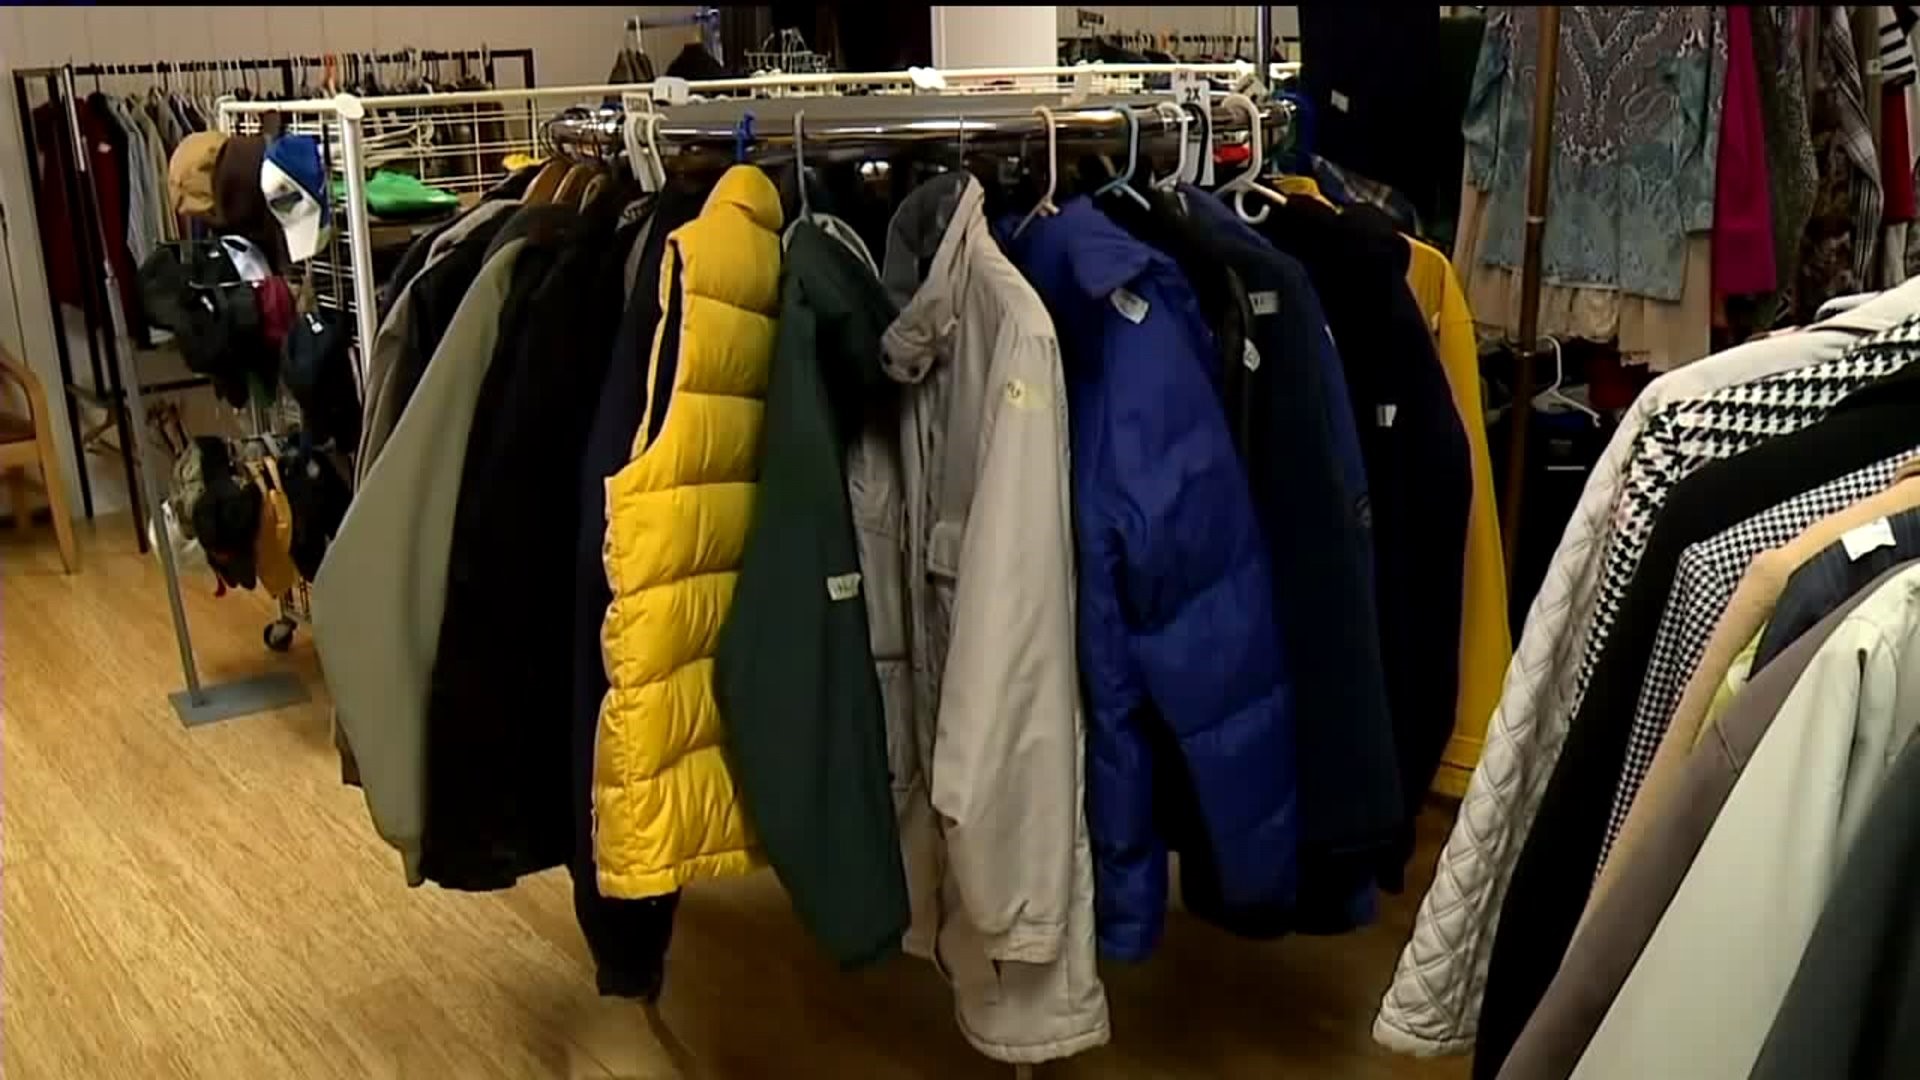 Winter Coats Needed at Clothing Pantry in the Poconos